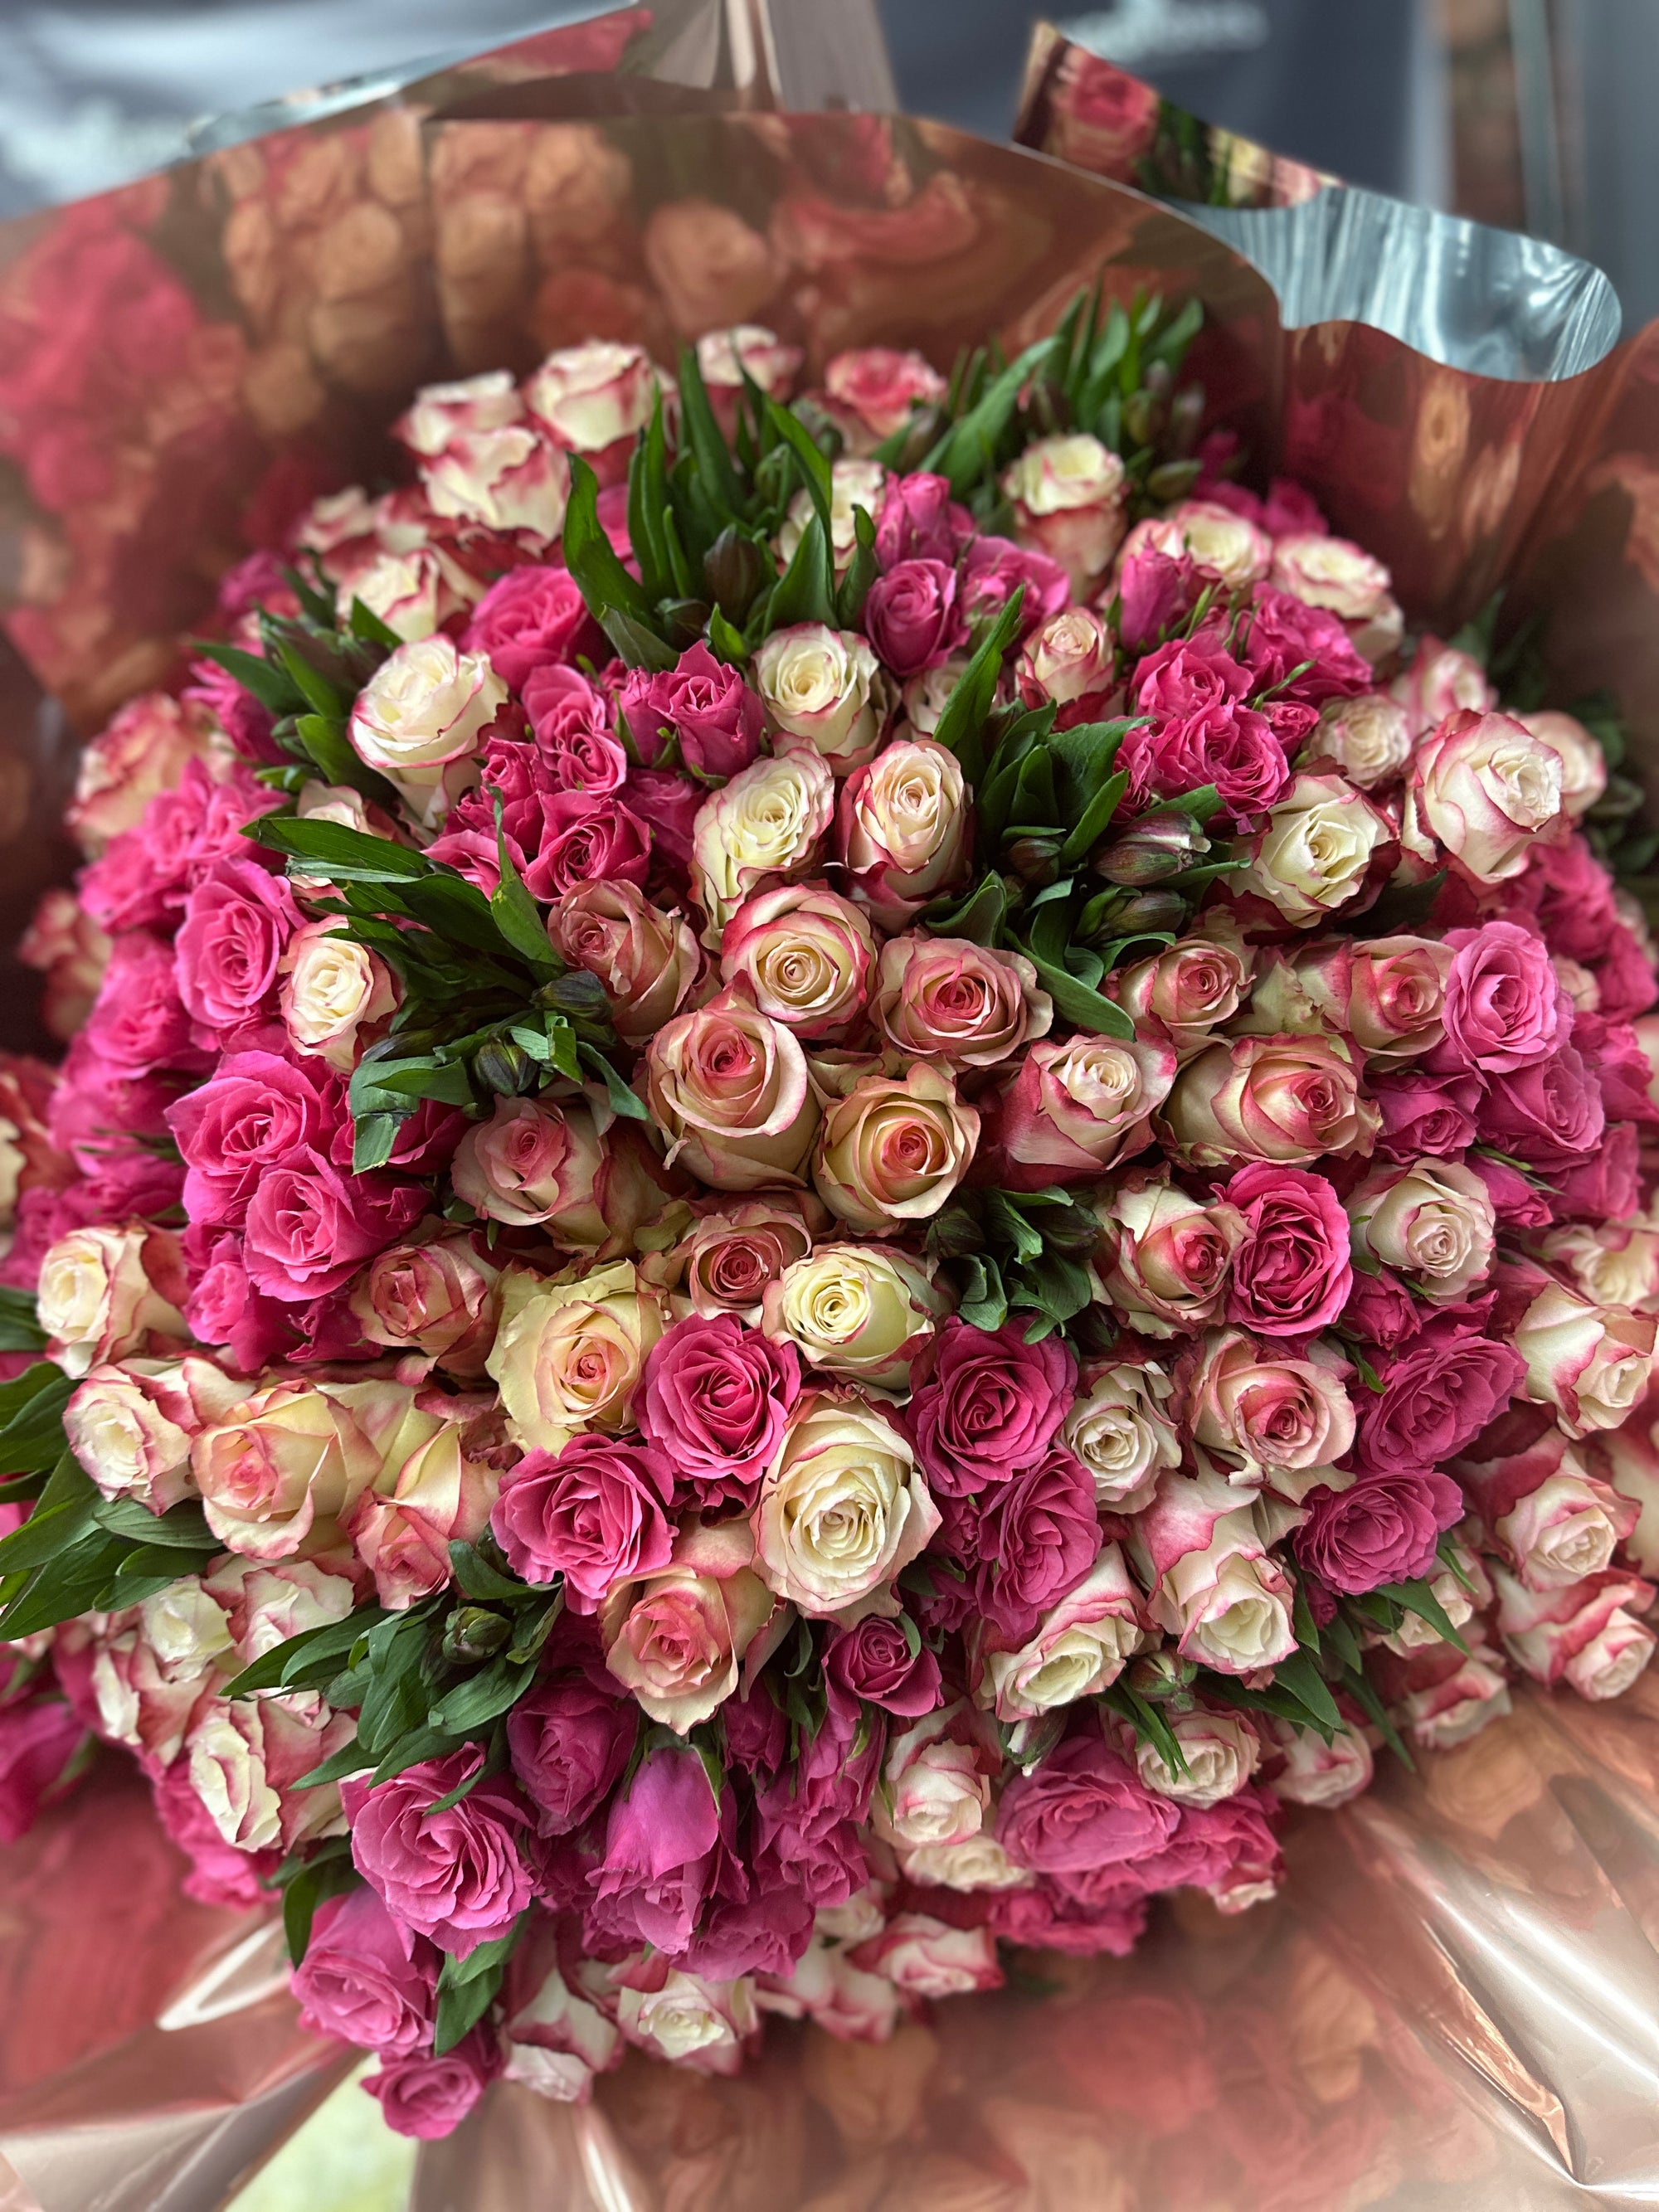 Luxury Roses Love's Embrace, a deluxe bouquet overflowing with vibrant flowers